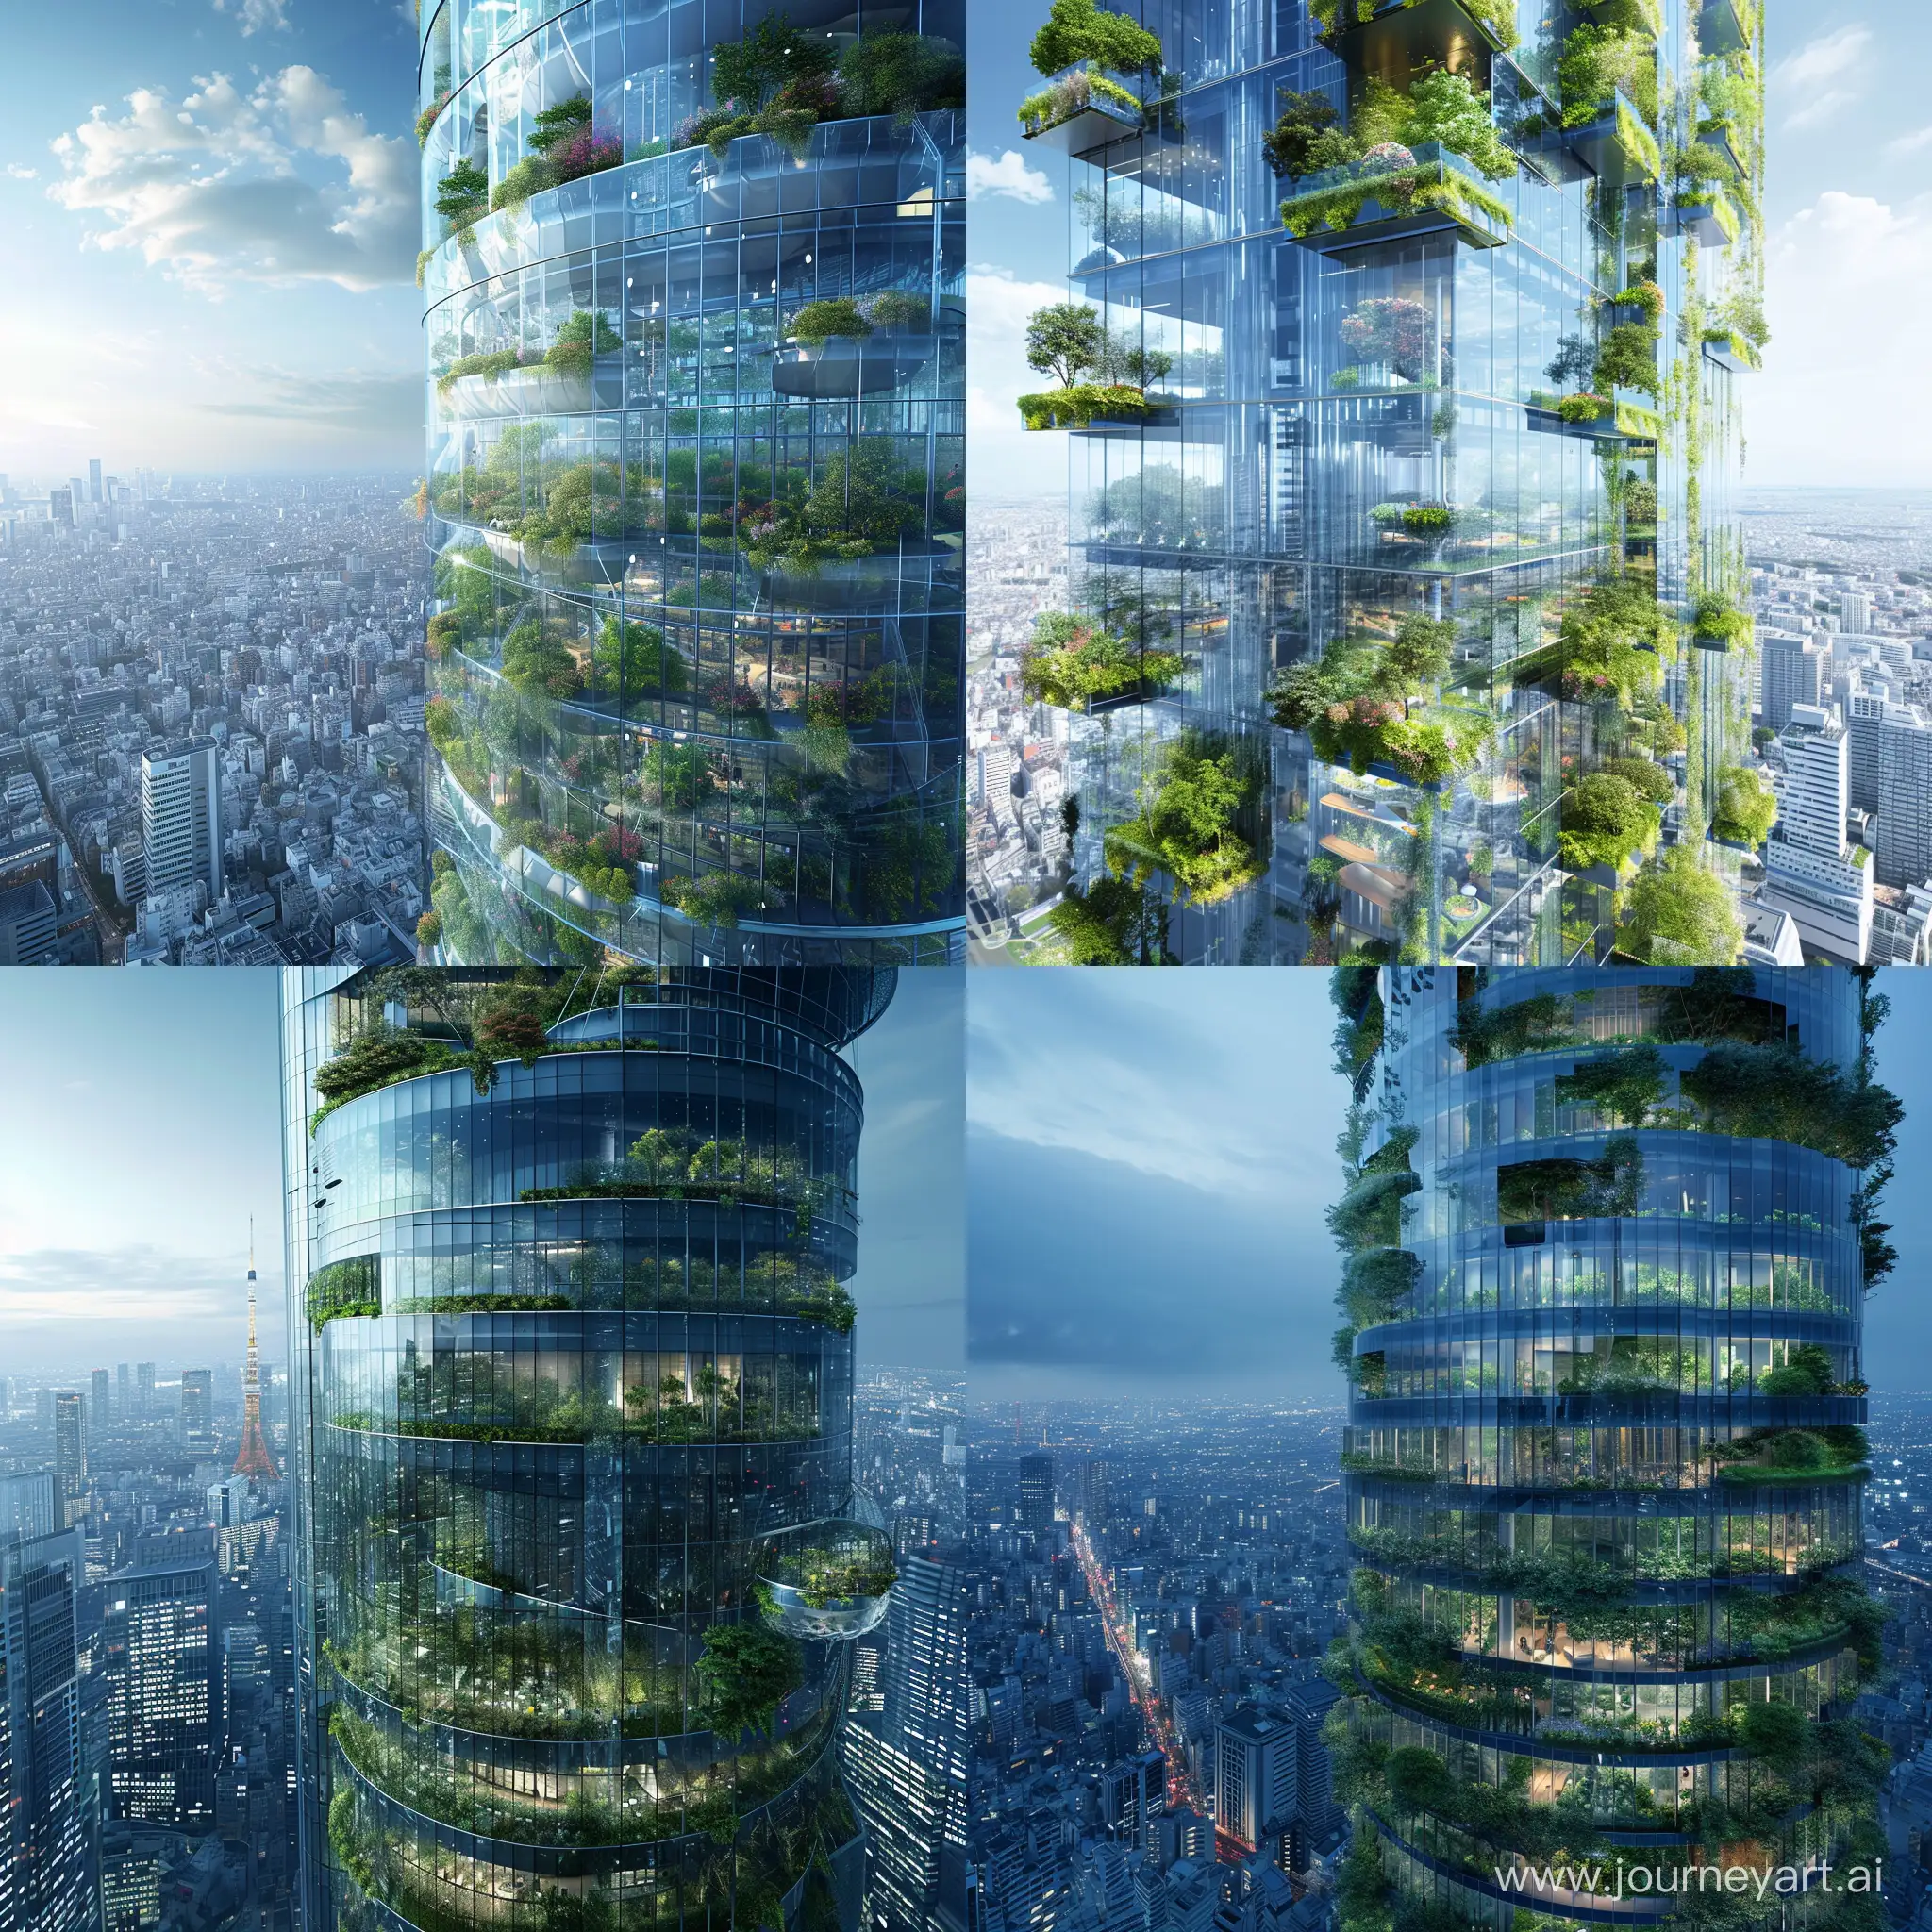 Futuristic-Glass-Skyscraper-with-Parametric-Facade-and-Hanging-Gardens-in-Tokyo